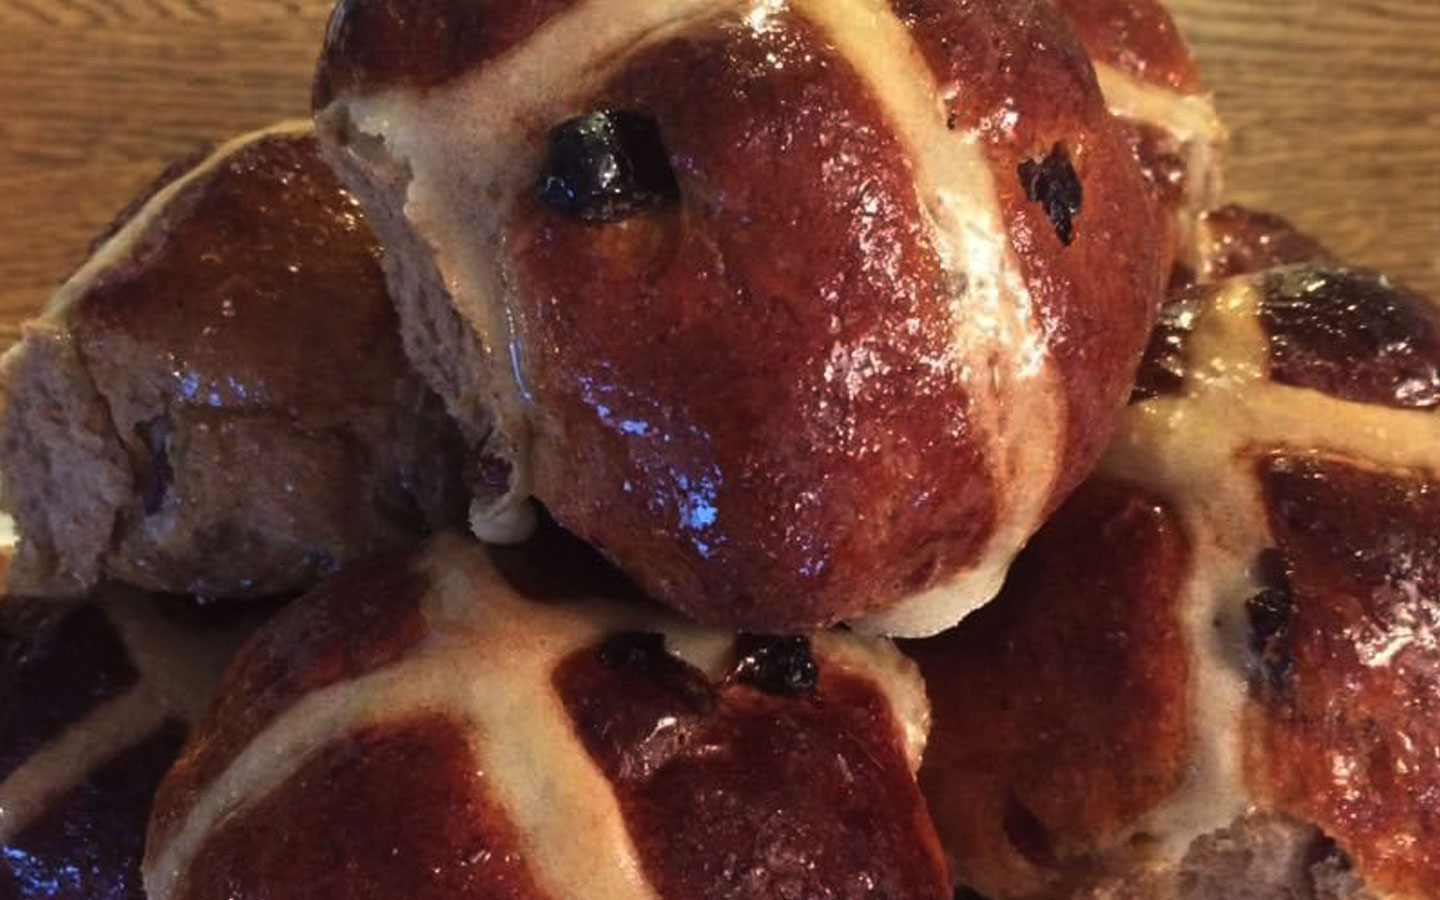 Delicious hot cross buns with glistening coating